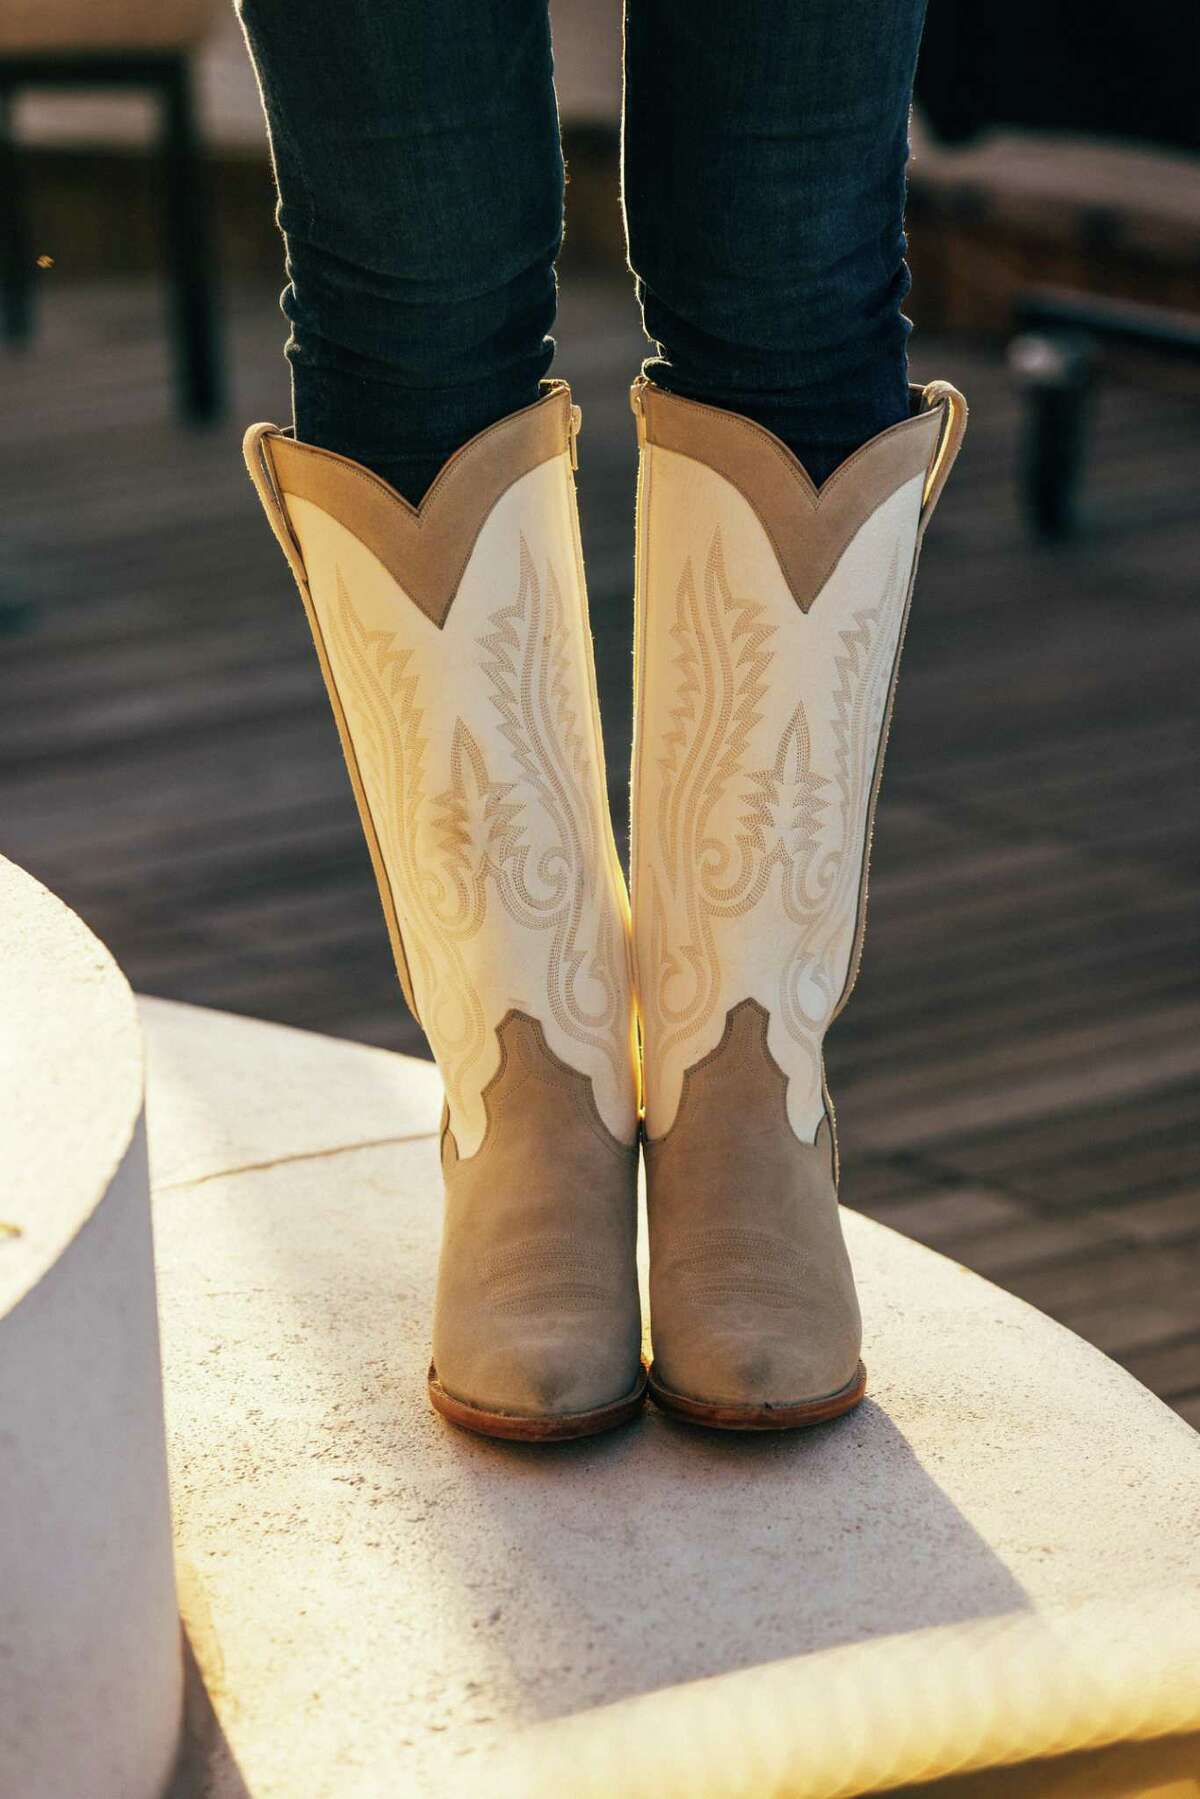 Boots can be customized Kemo Sabe custom boot prices start at $775.